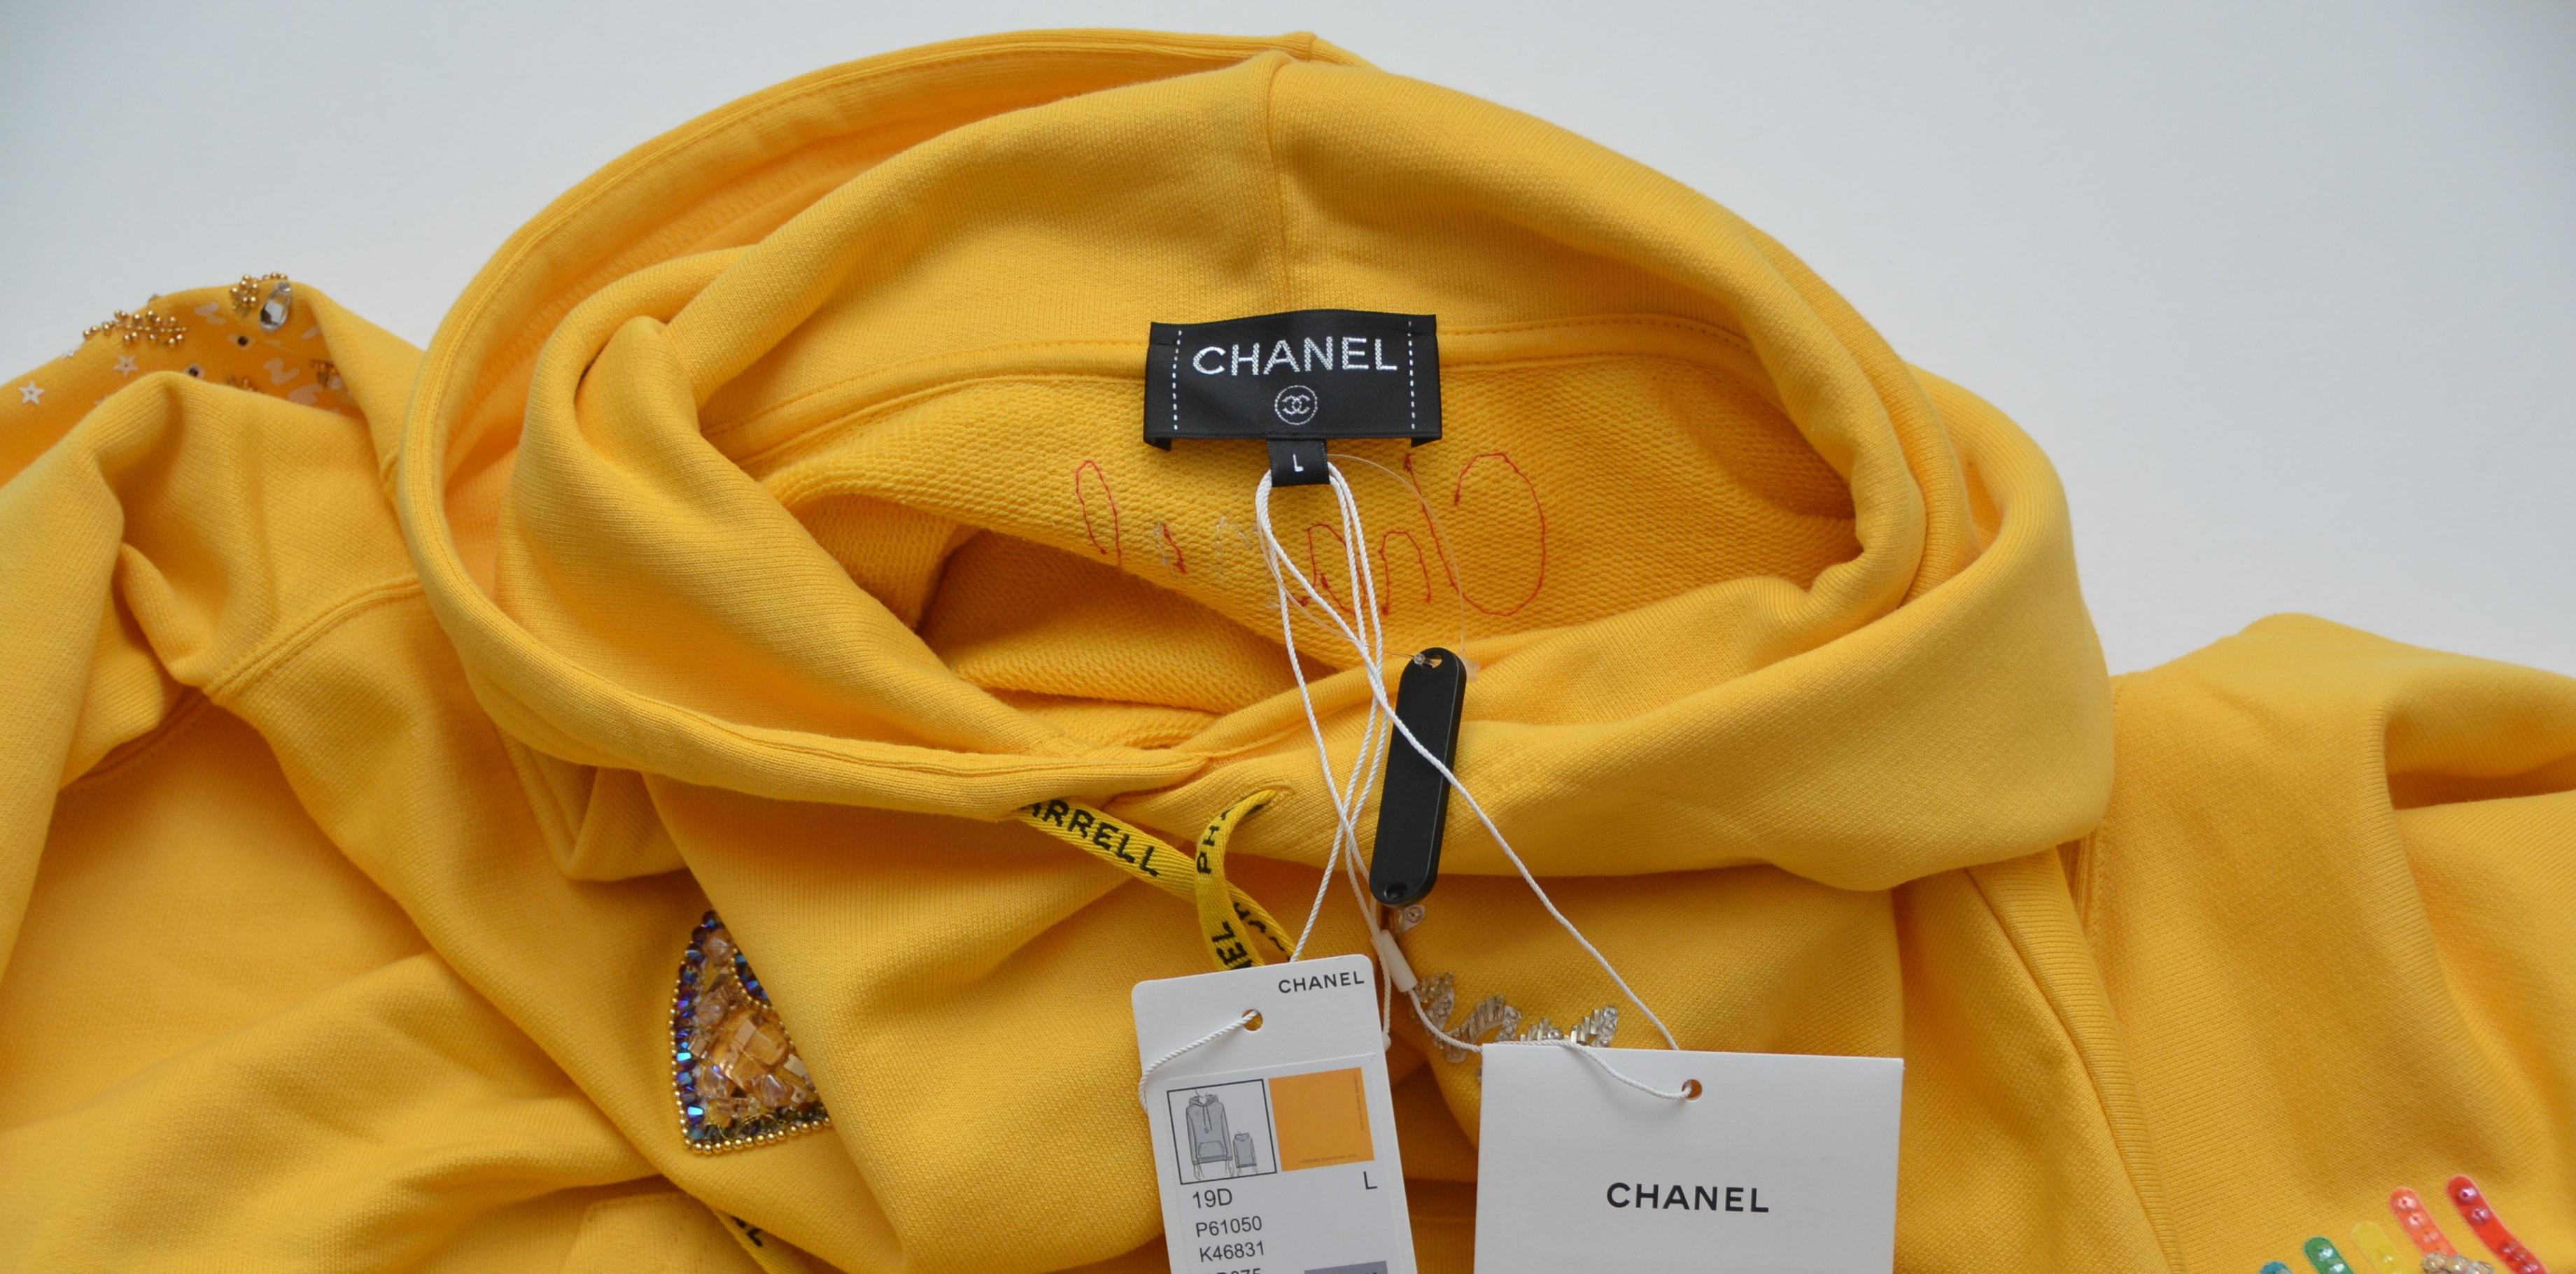  Chanel x Pharrell Capsule Collection Hoodie  Lesage Embroidery Yellow  L NEW 3